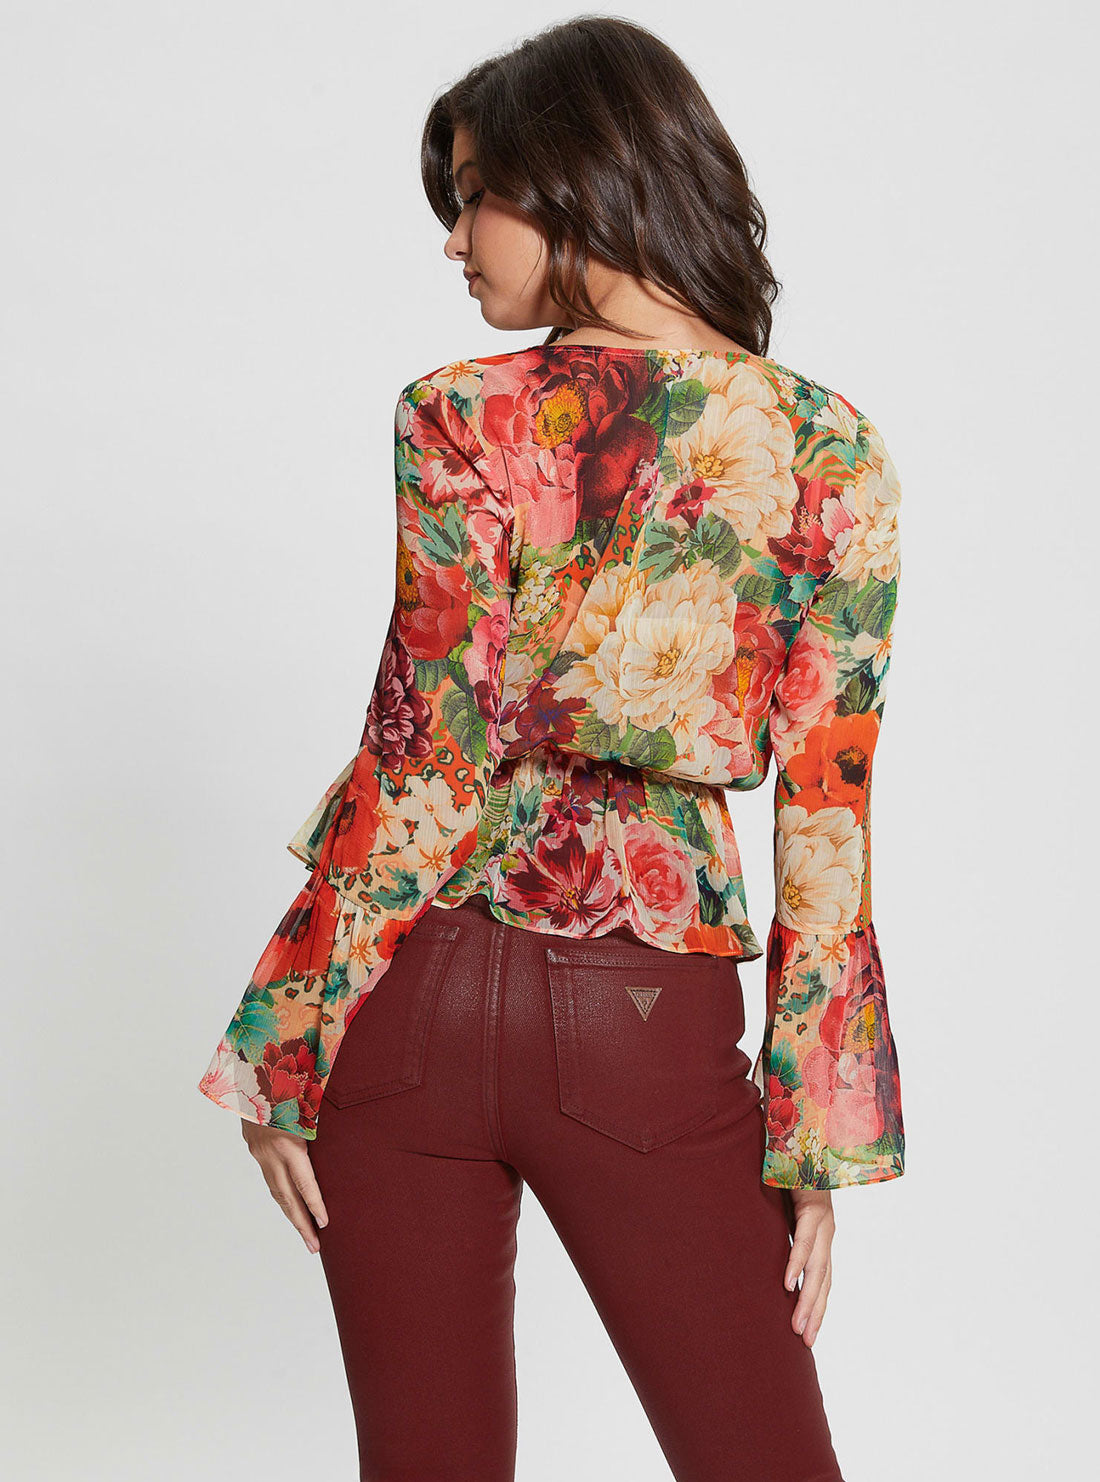 GUESS Floral Print Long Sleeve Demi Top back view